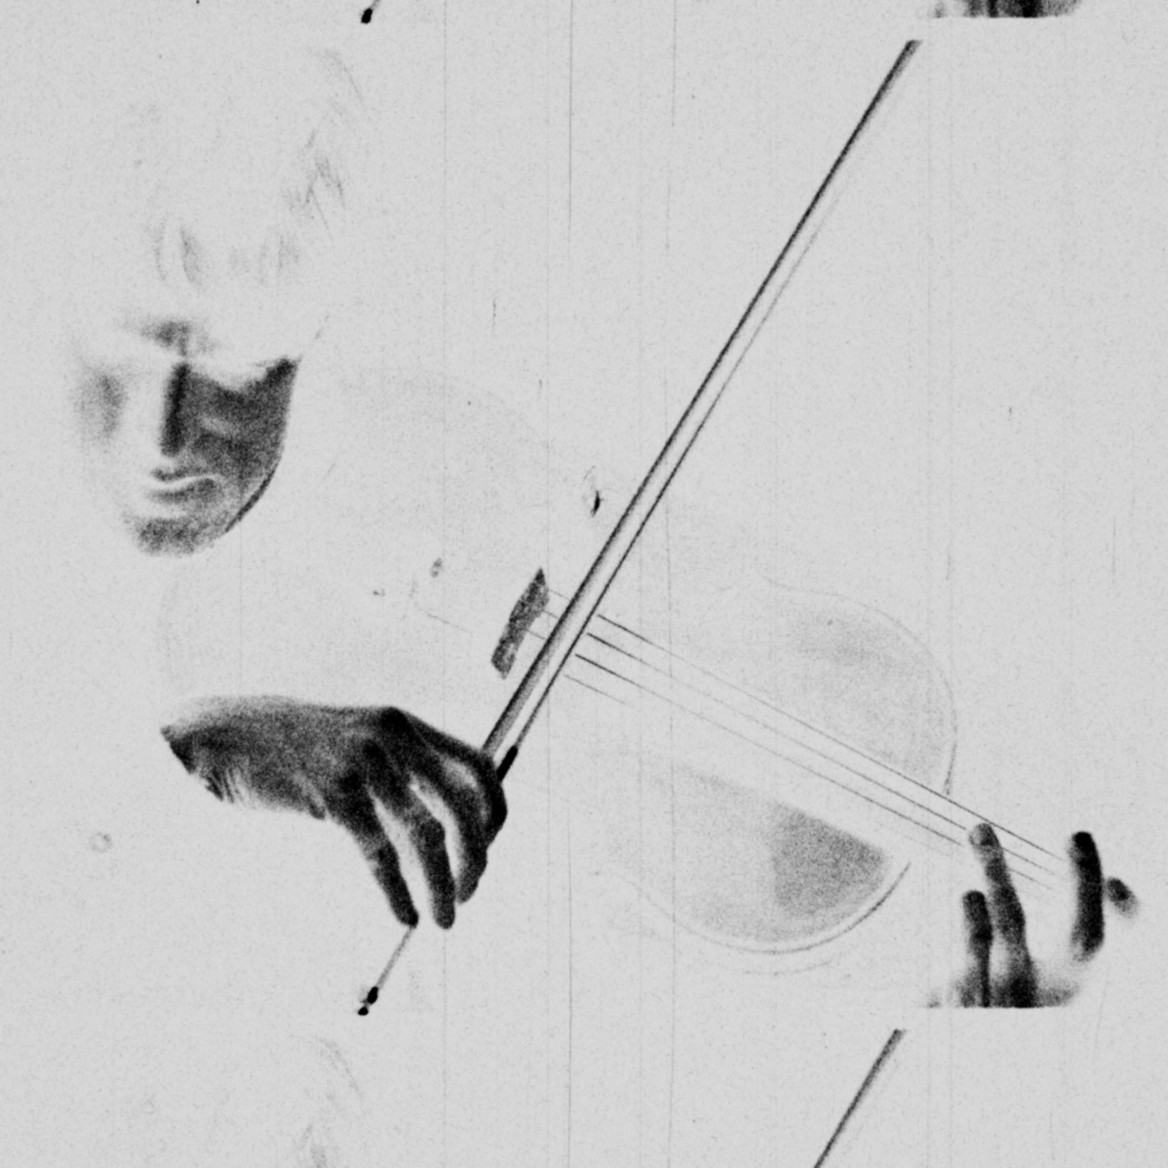 Tempo Adagio film still shows a solarised image of a violinist playing